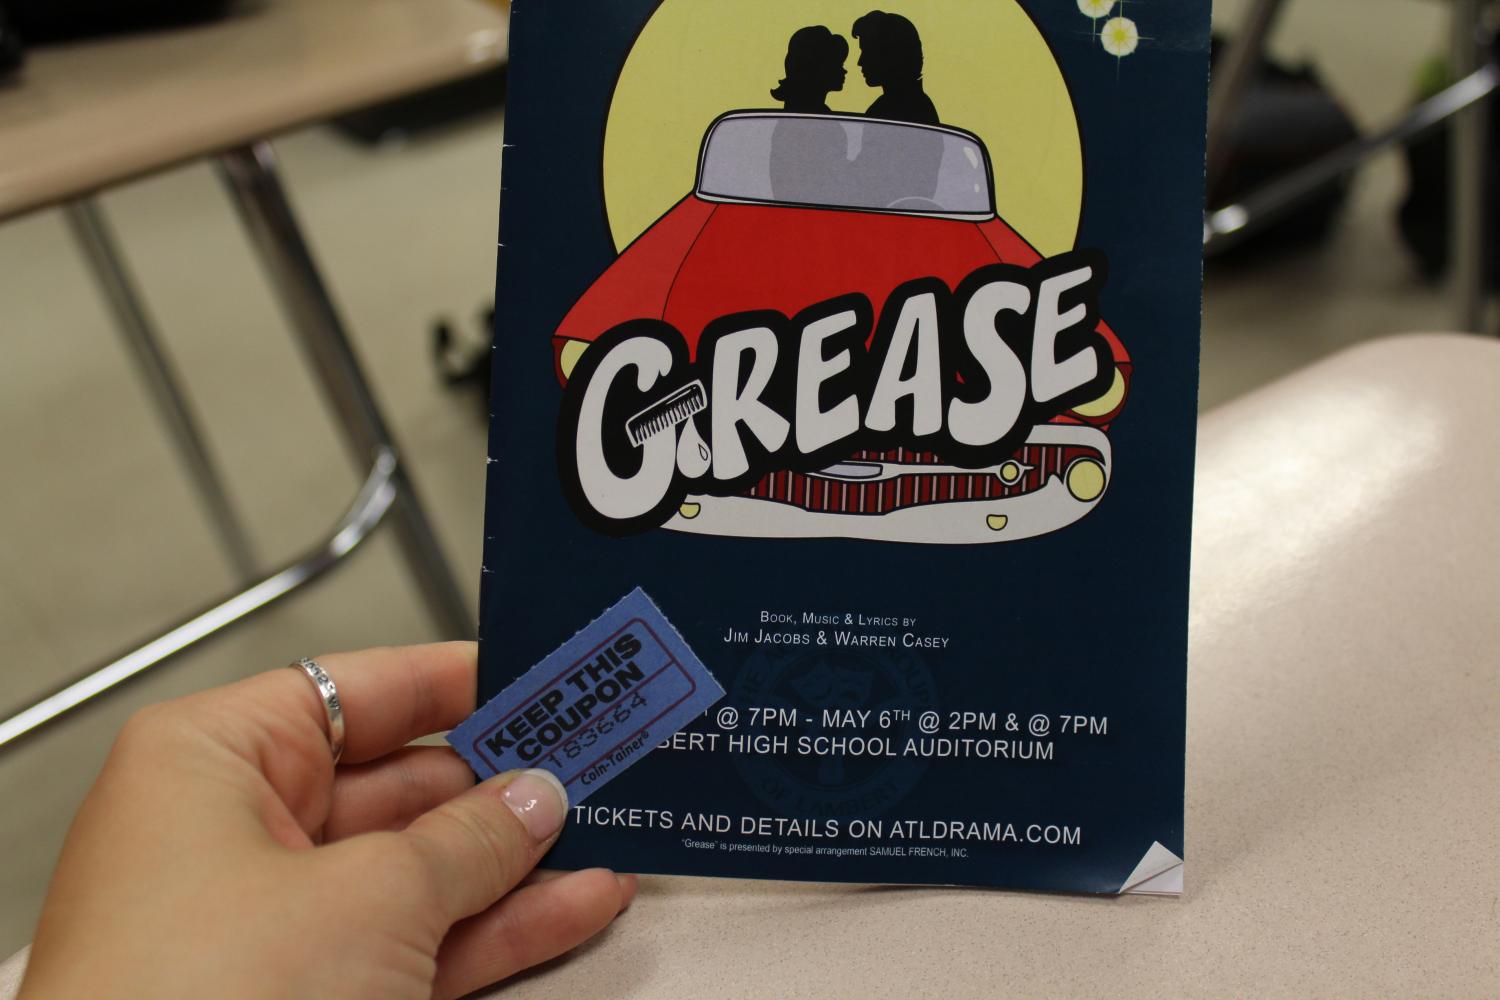 The+production+of+Grease+was+full+of+songs+from+the+film%2C+but+a+crowd+favorite+was+We+Go+Together.